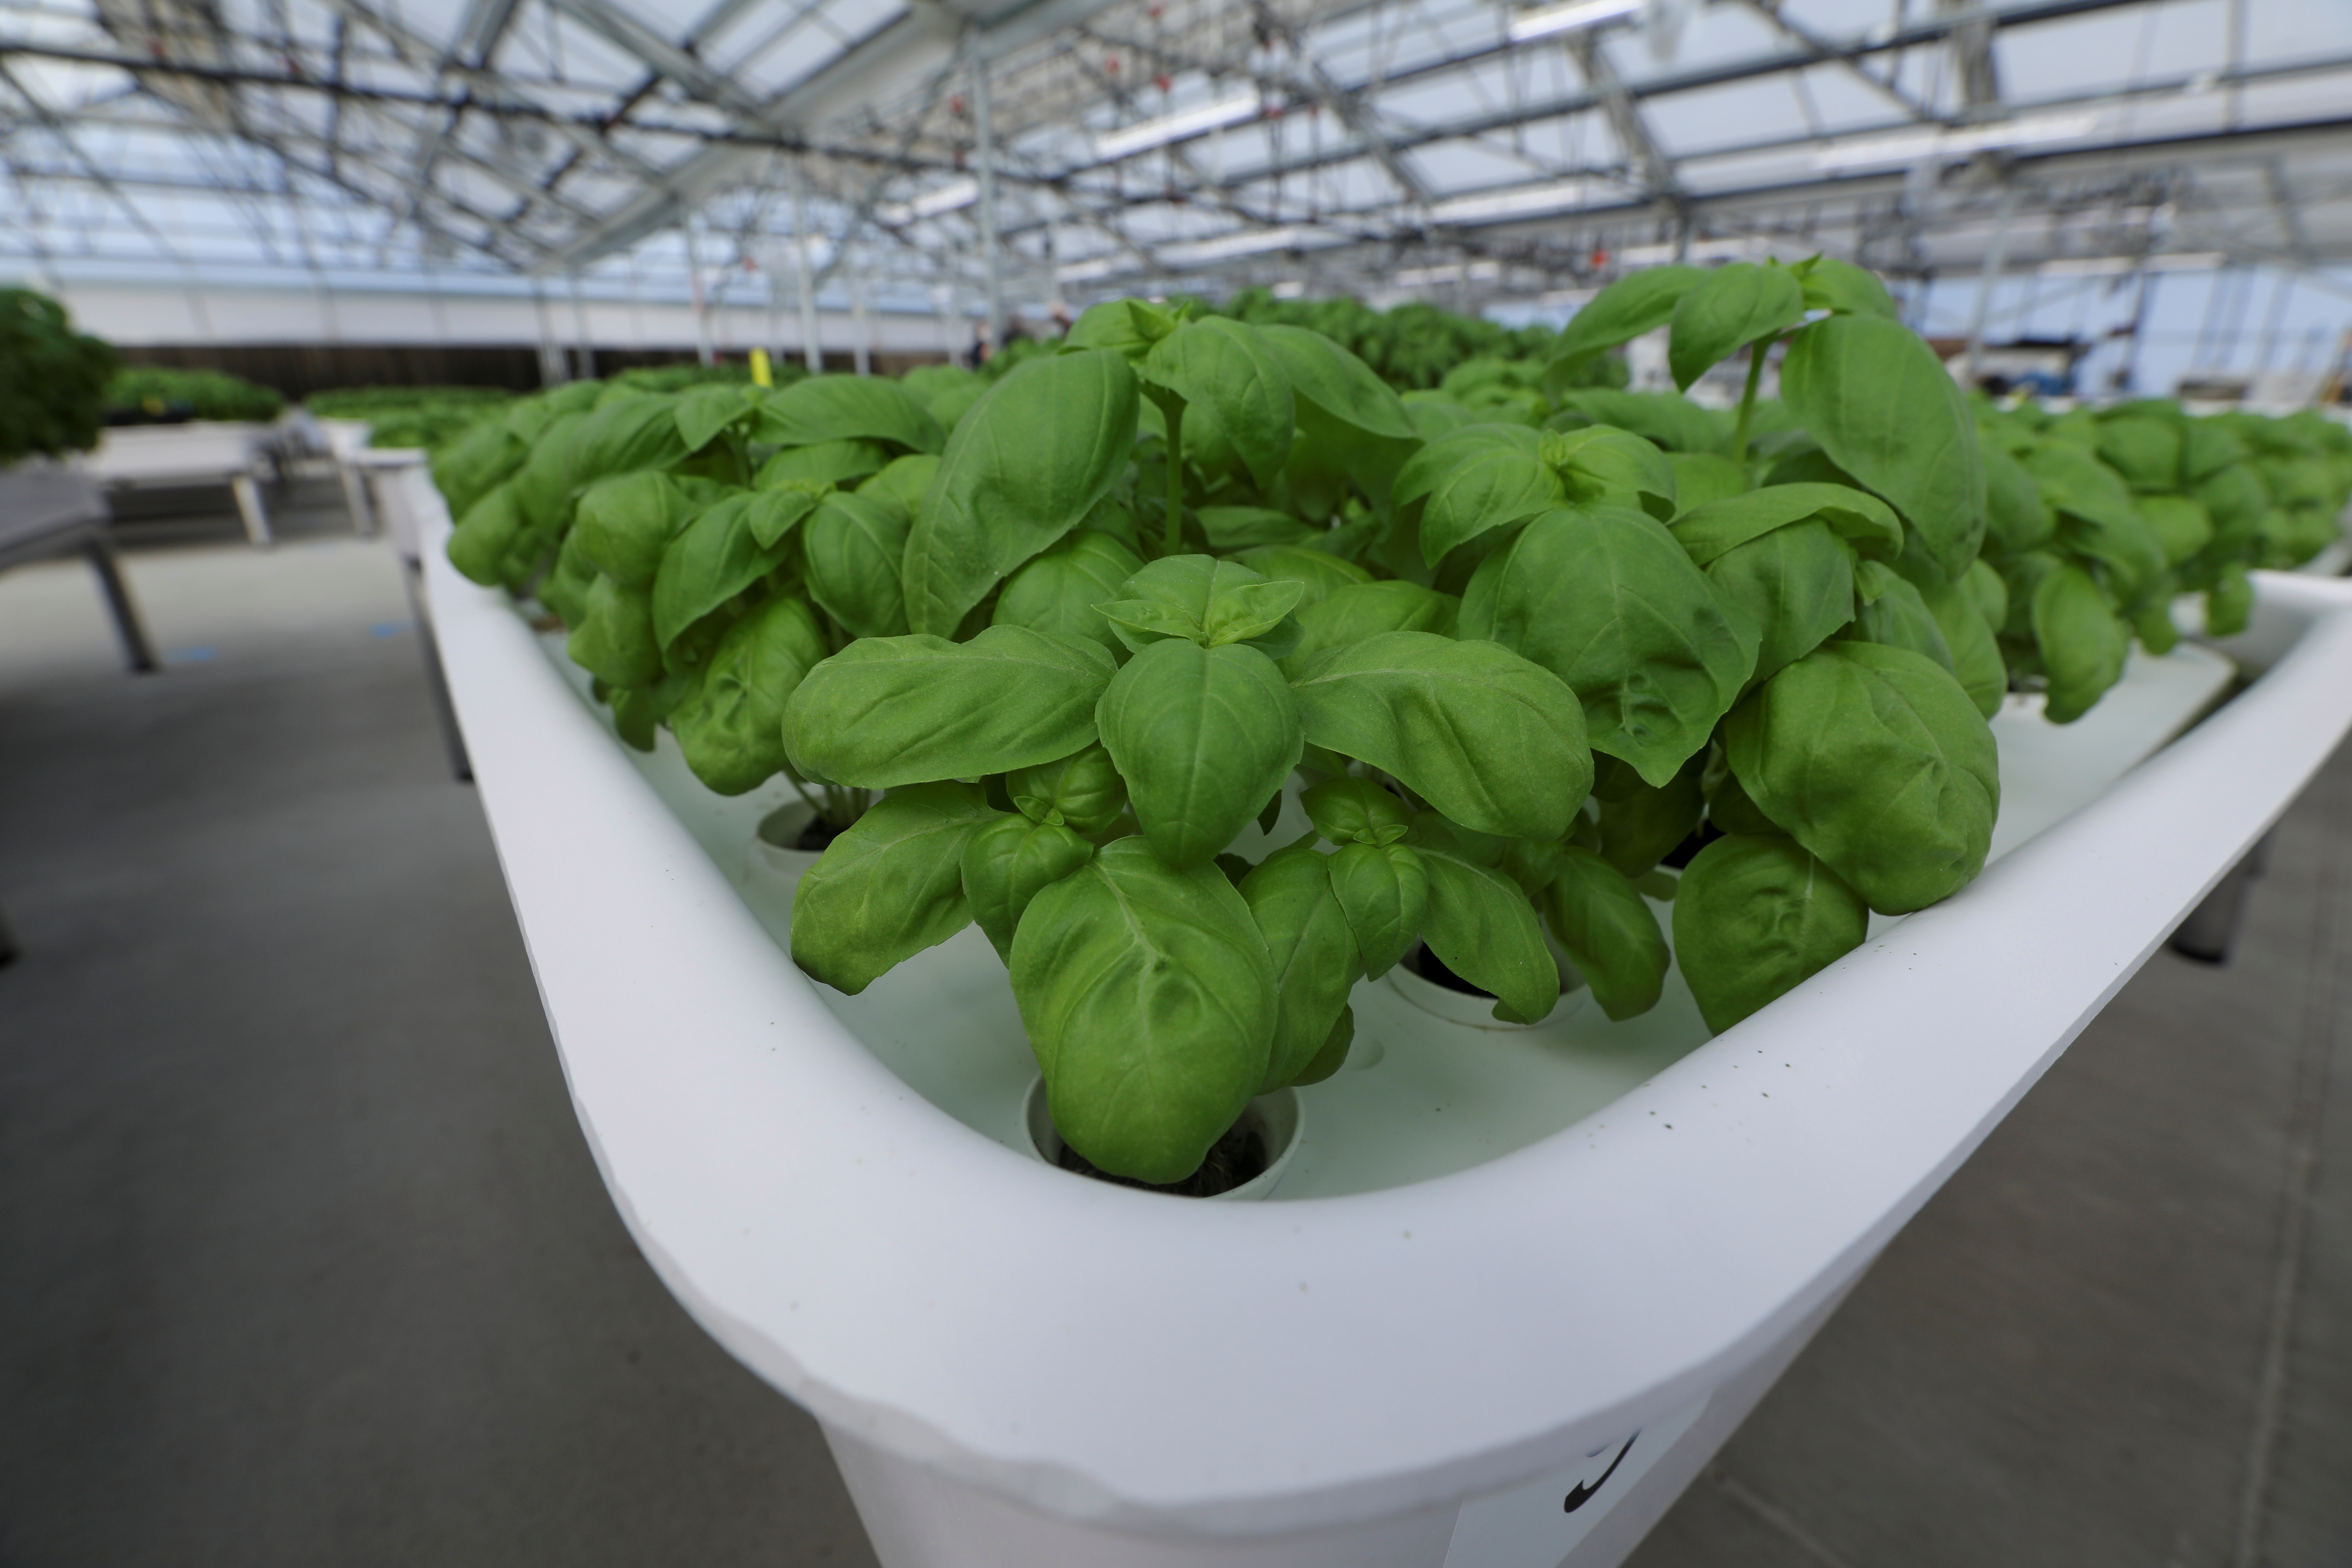 Genovese Basil plants sit in a module in the Iron Ox greenhouse in Gilroy, California